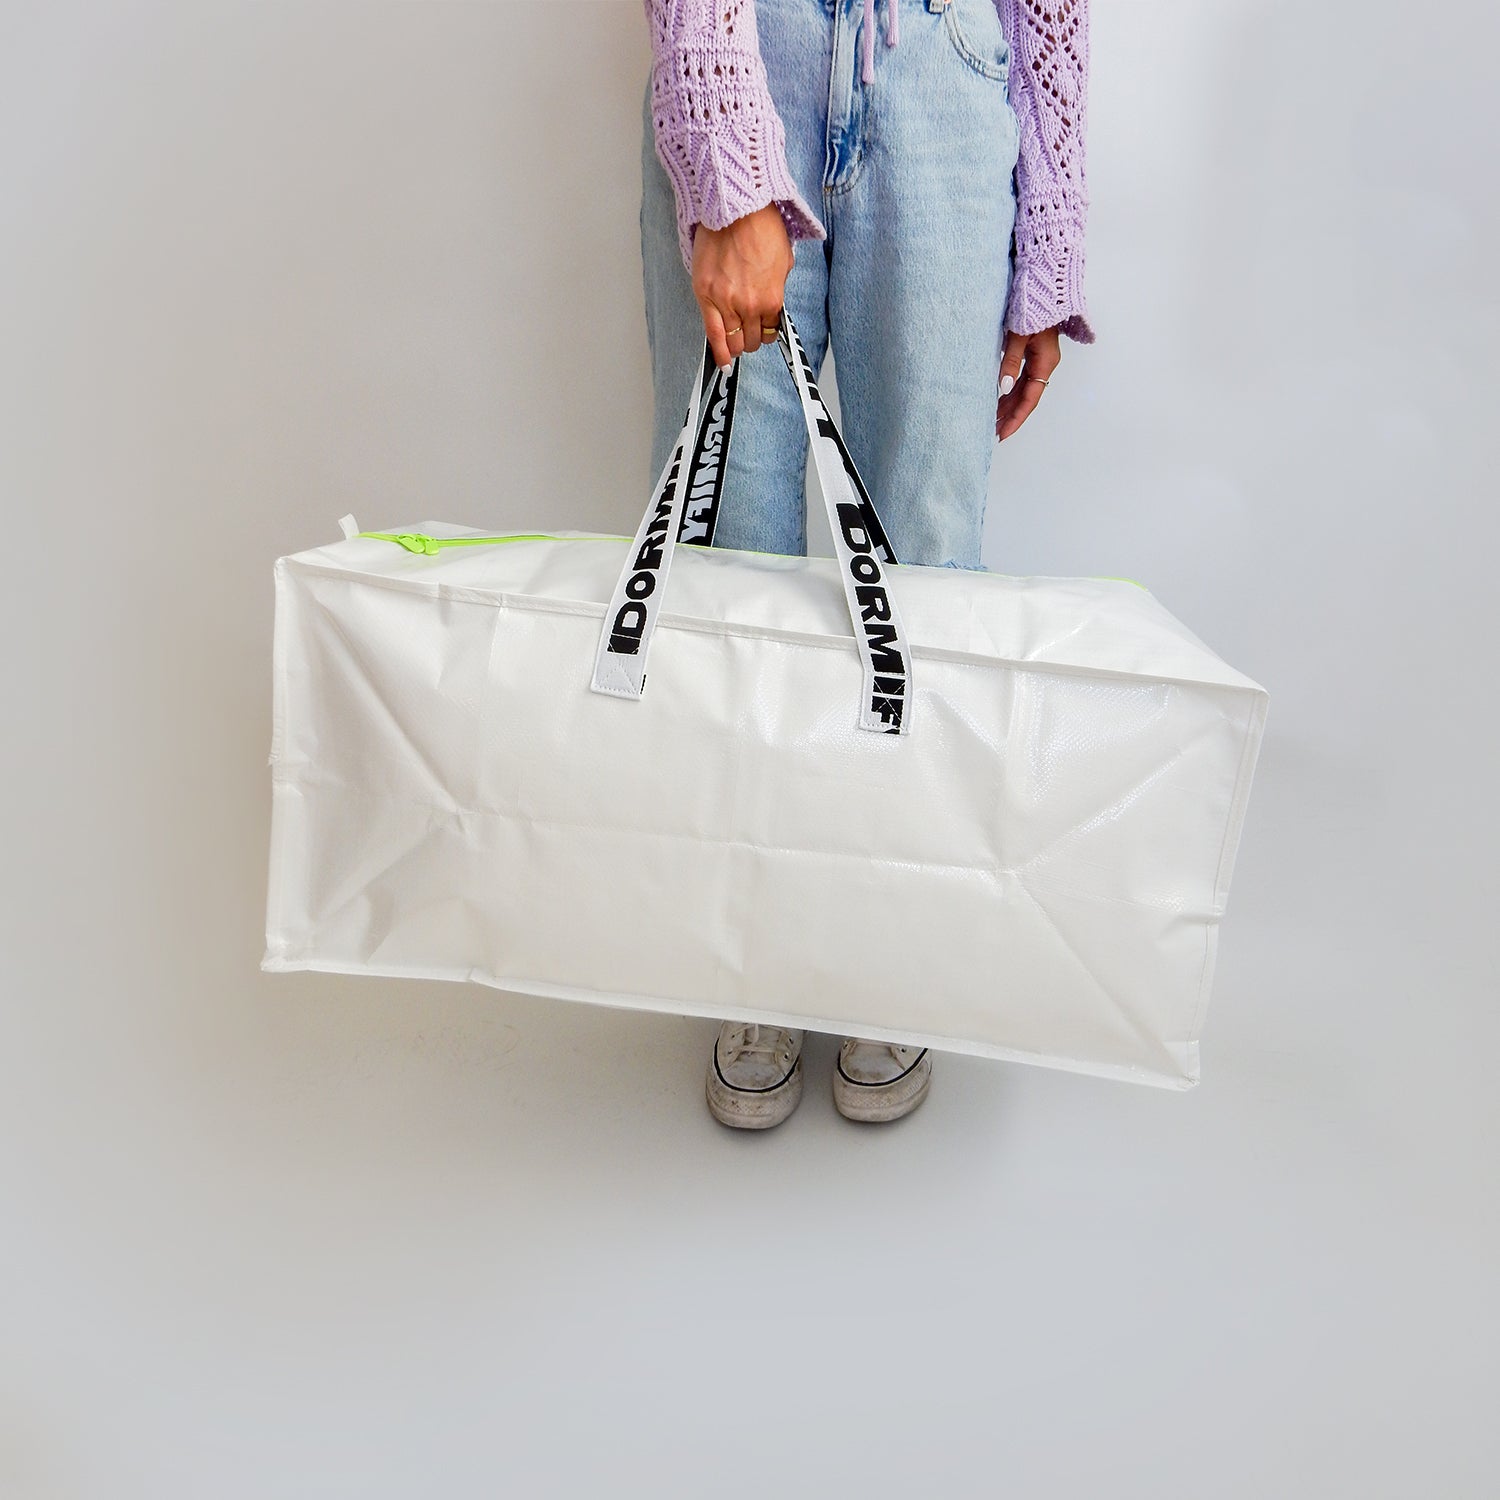 Dormify Storage Duffle Bag for College Dorms - White